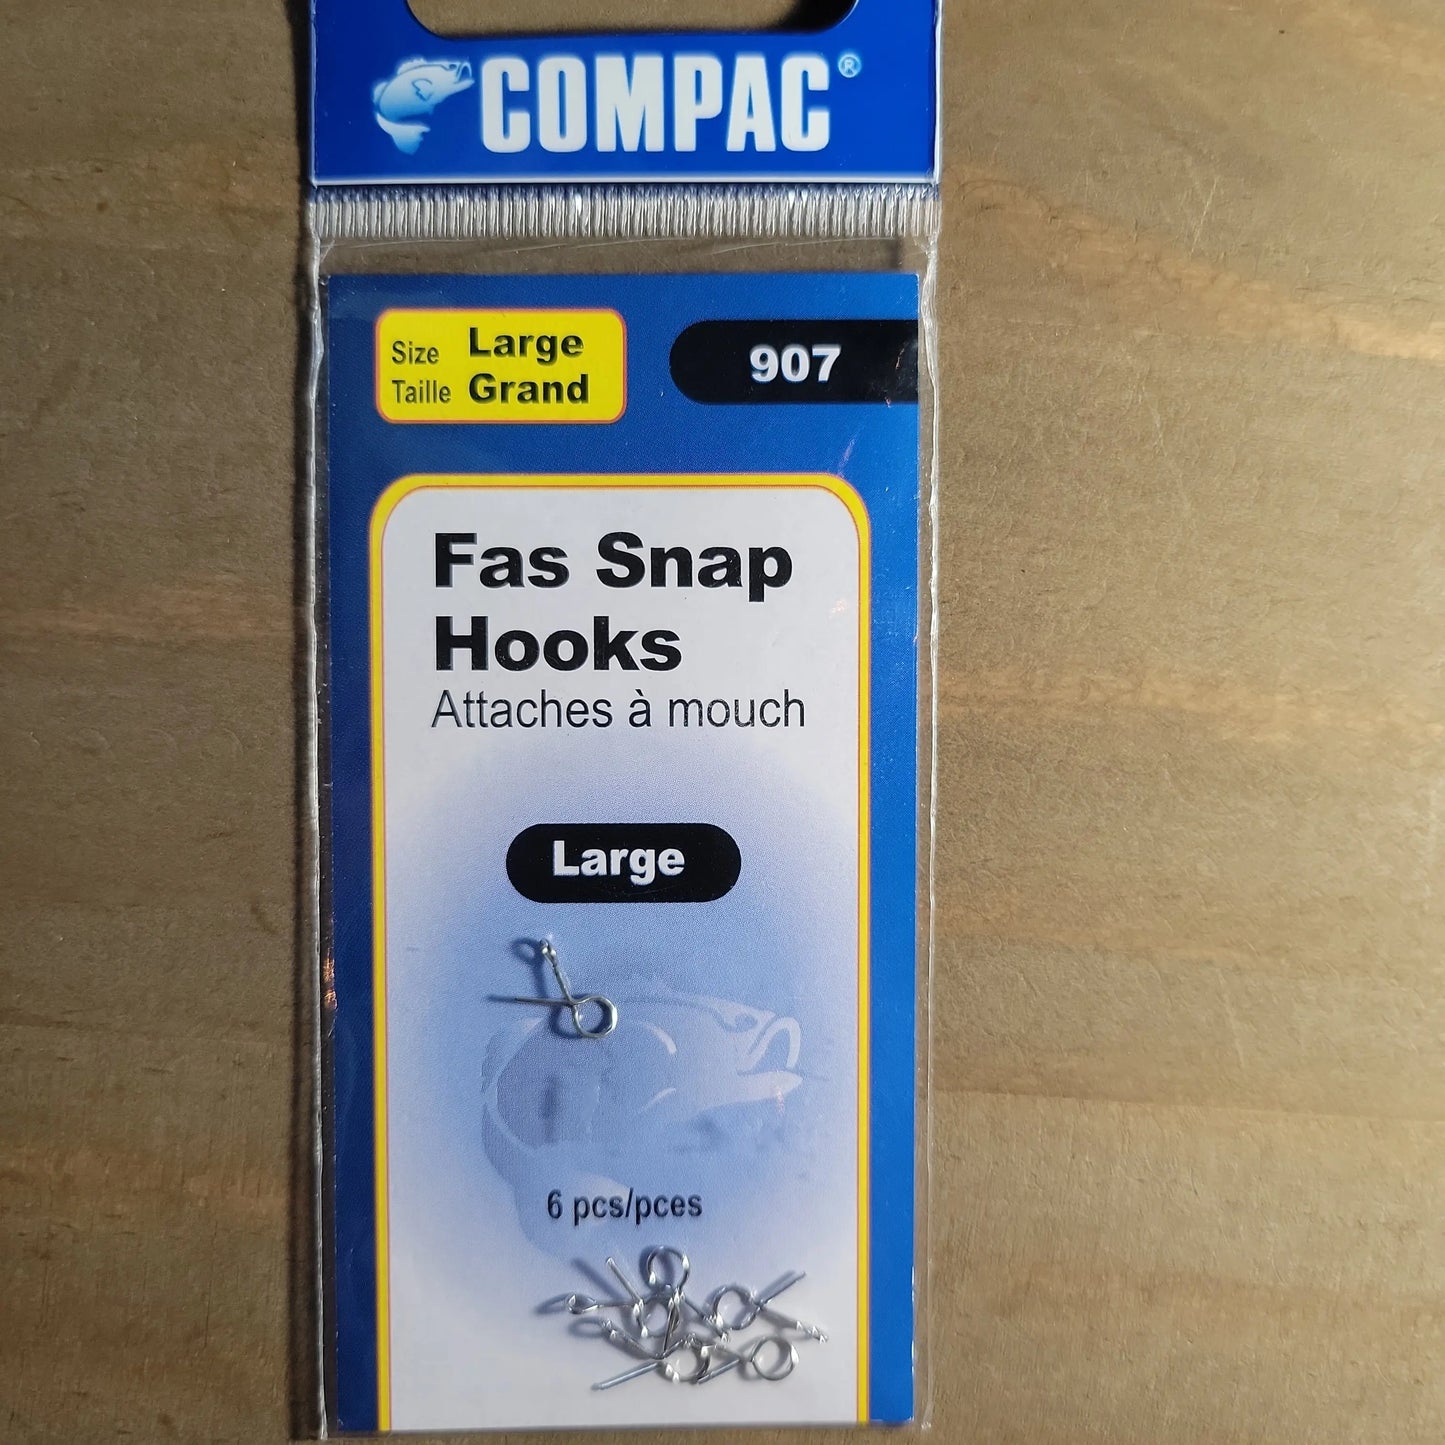 COMPAC Fas Snap Hooks Large 6pack C.G. Emery